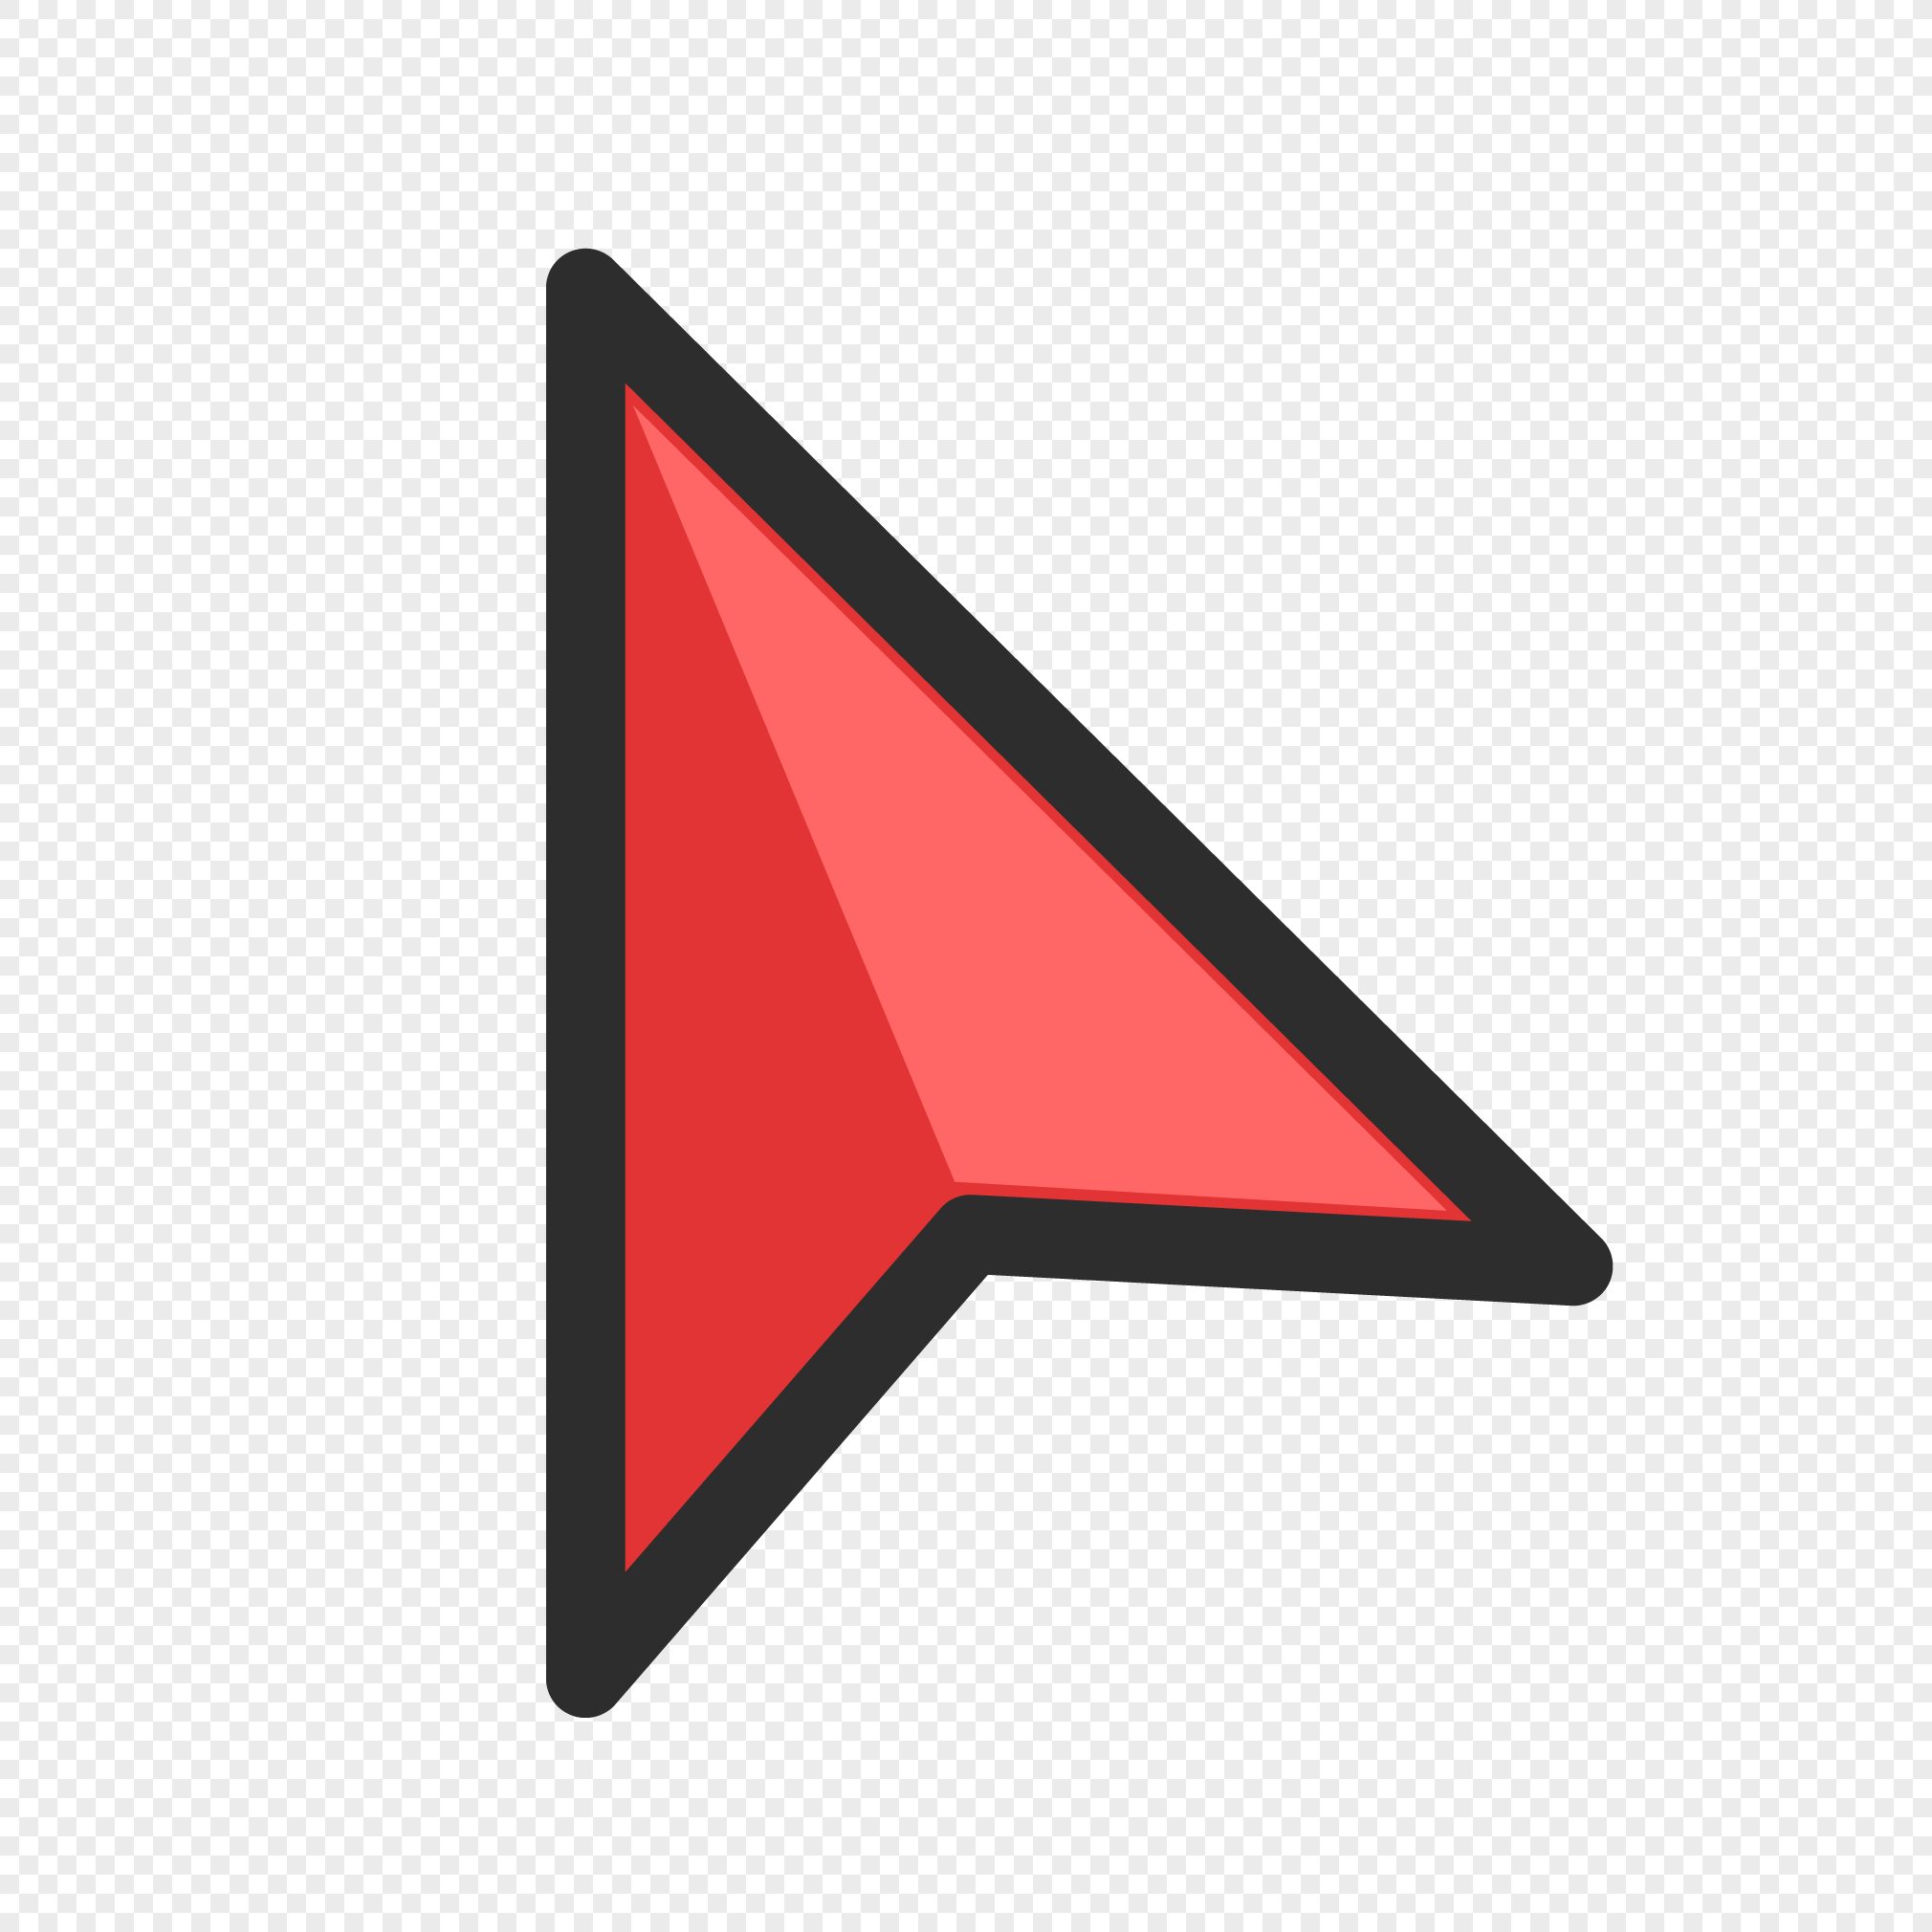 Red Mouse Logo - Cartoon red mouse cursor design small icon png image_picture free ...